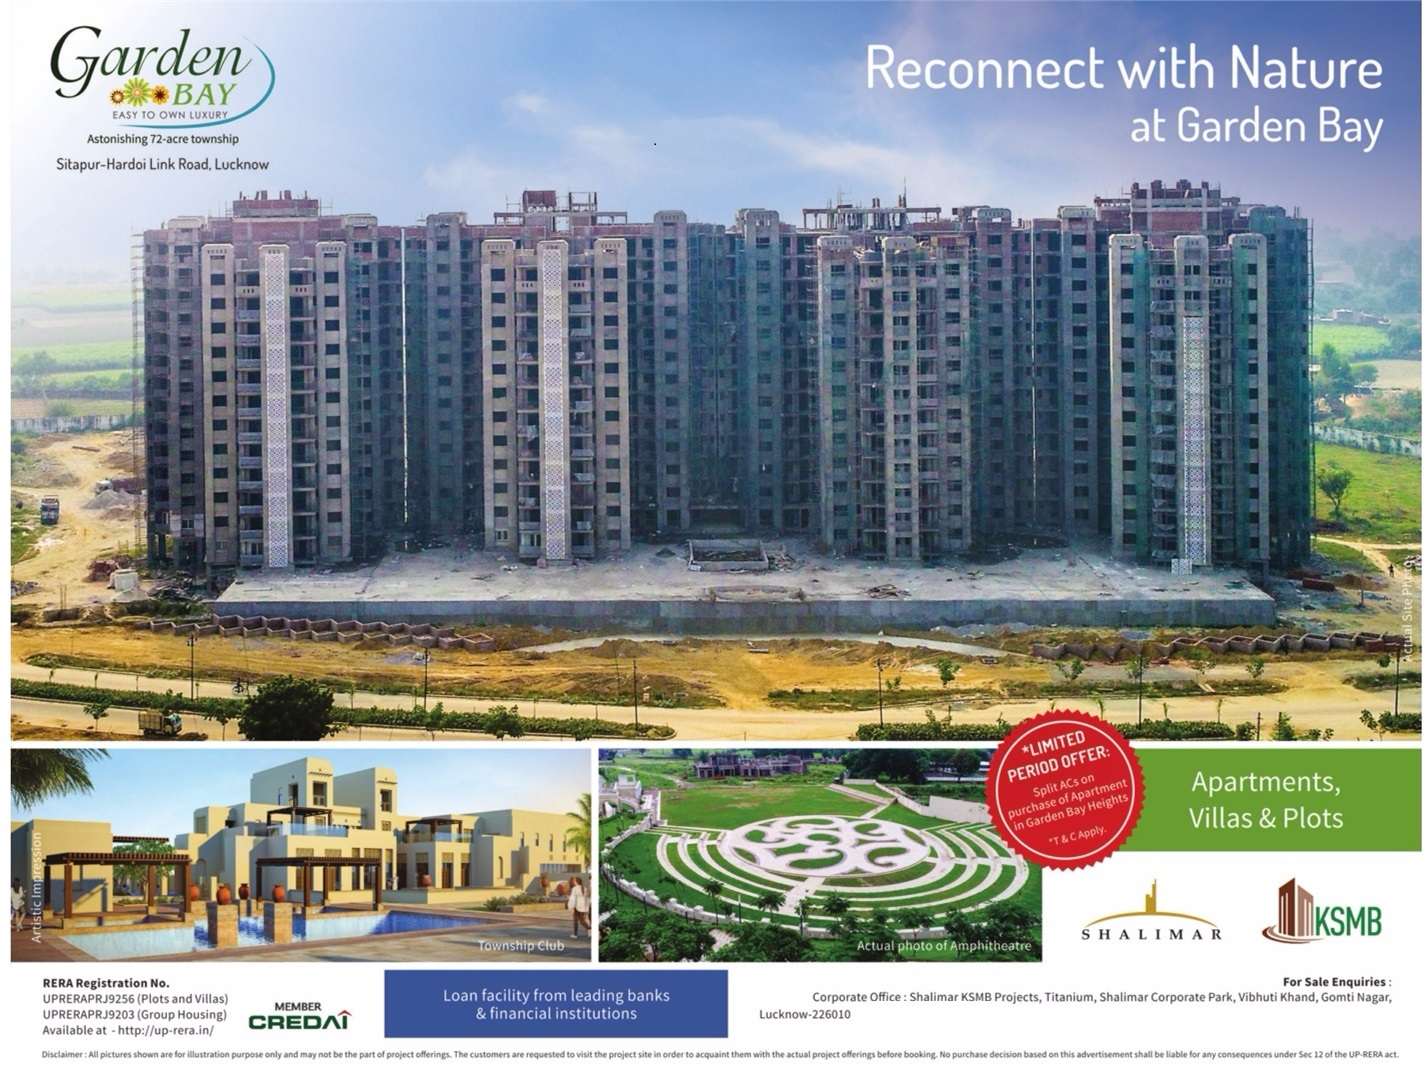 Reconnect with nature at Shalimar Garden Bay in Lucknow Update